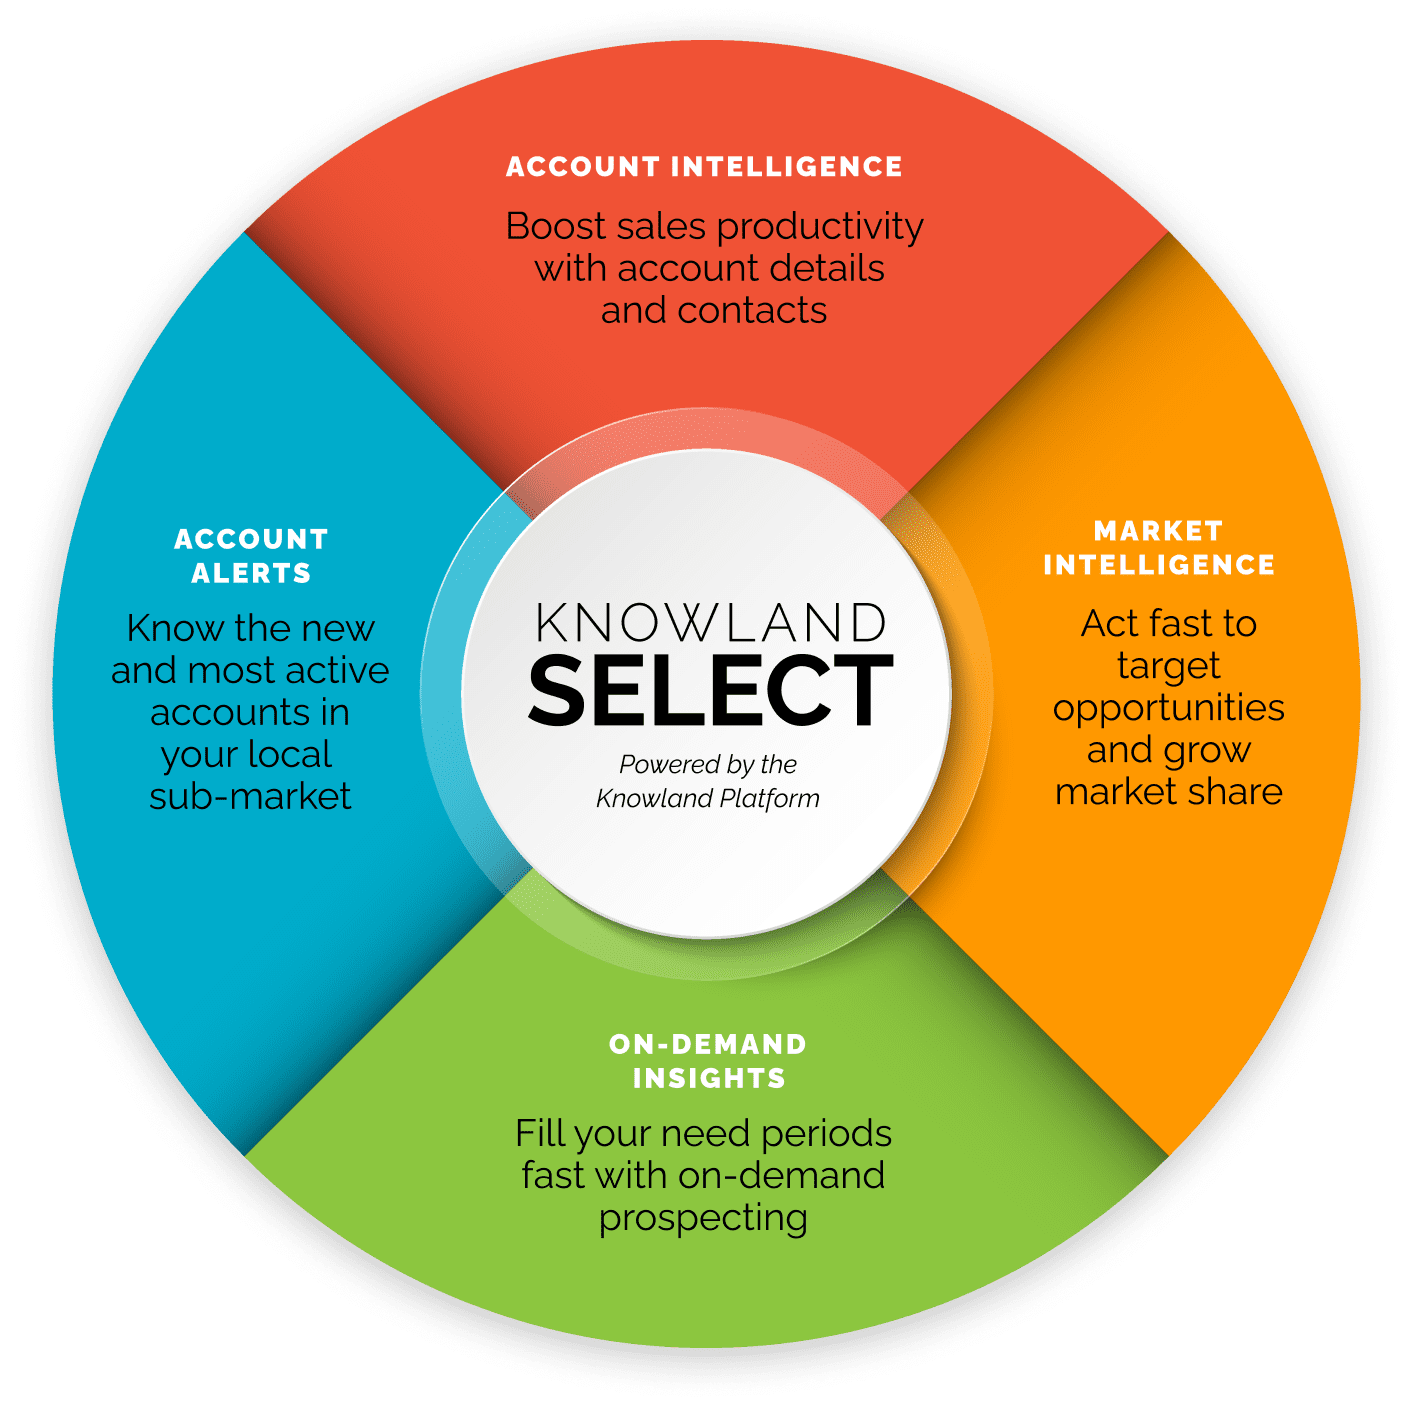 Knowland Select powered by the Knowland Platform